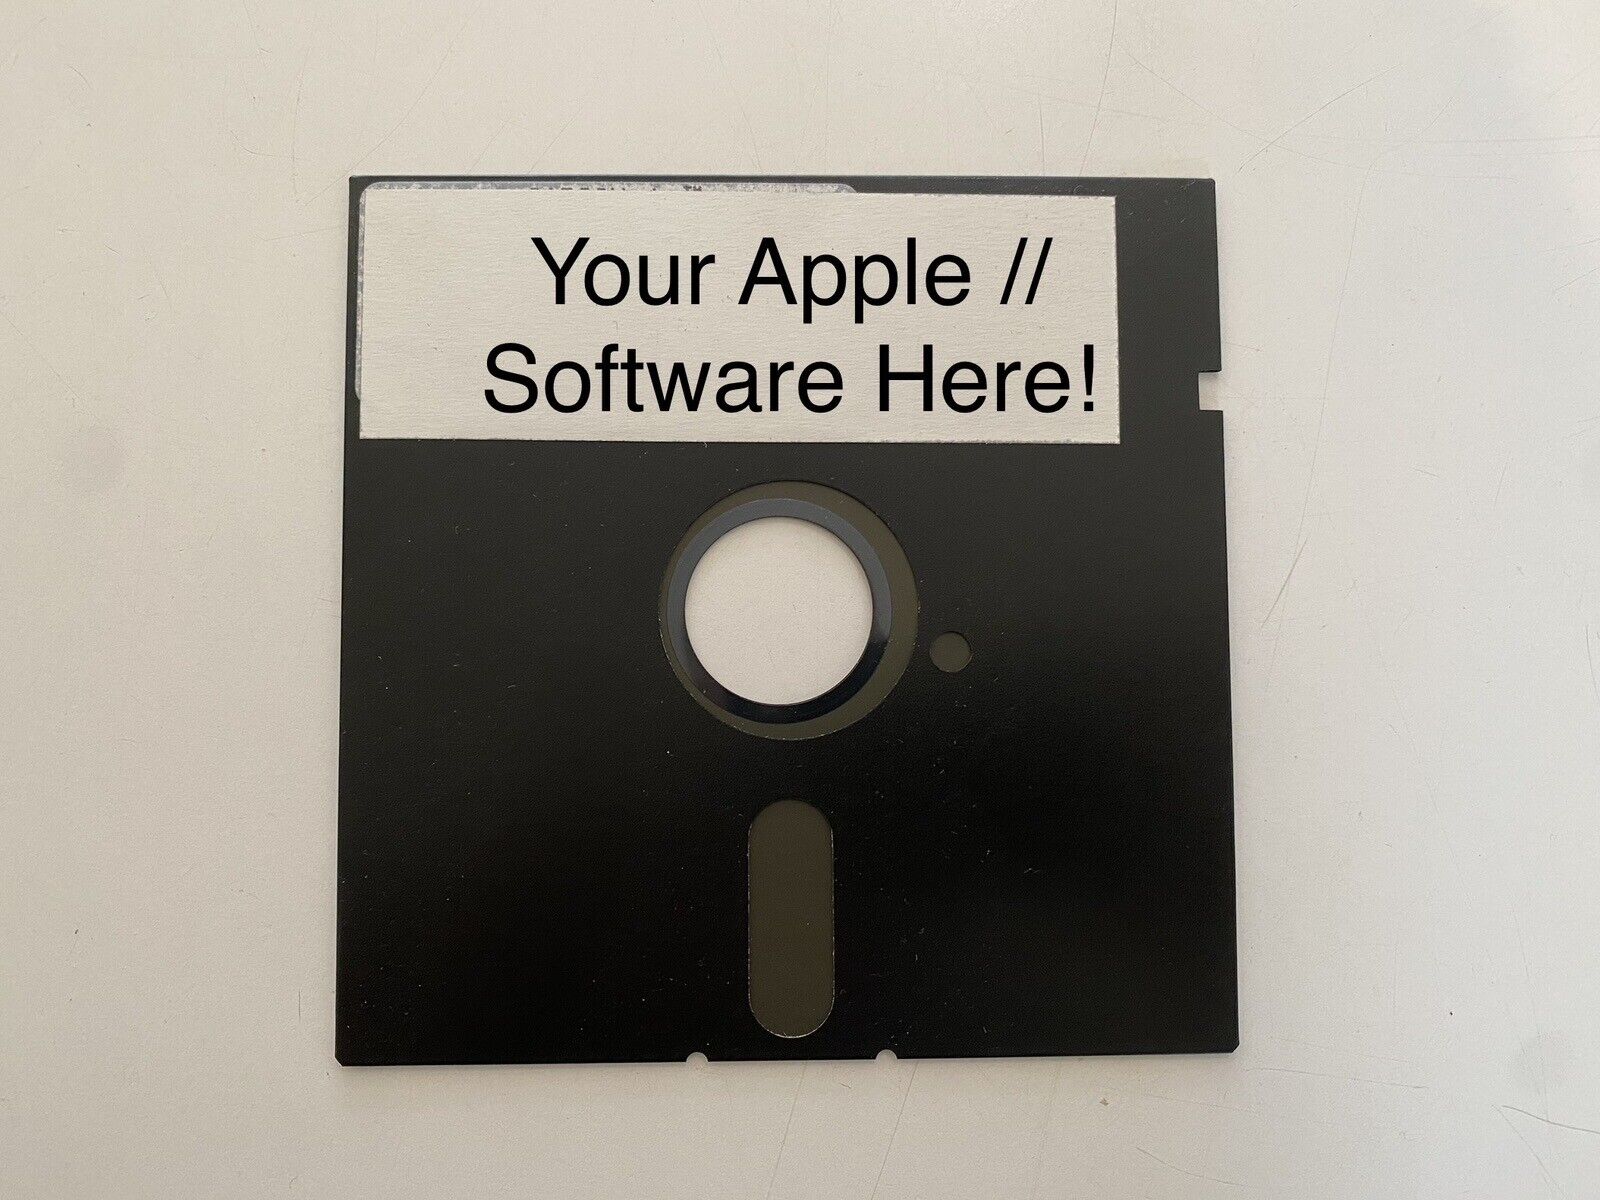 Vintage Apple 2 II   Boot / Game / Software Floppy Disks - Choose Your Own